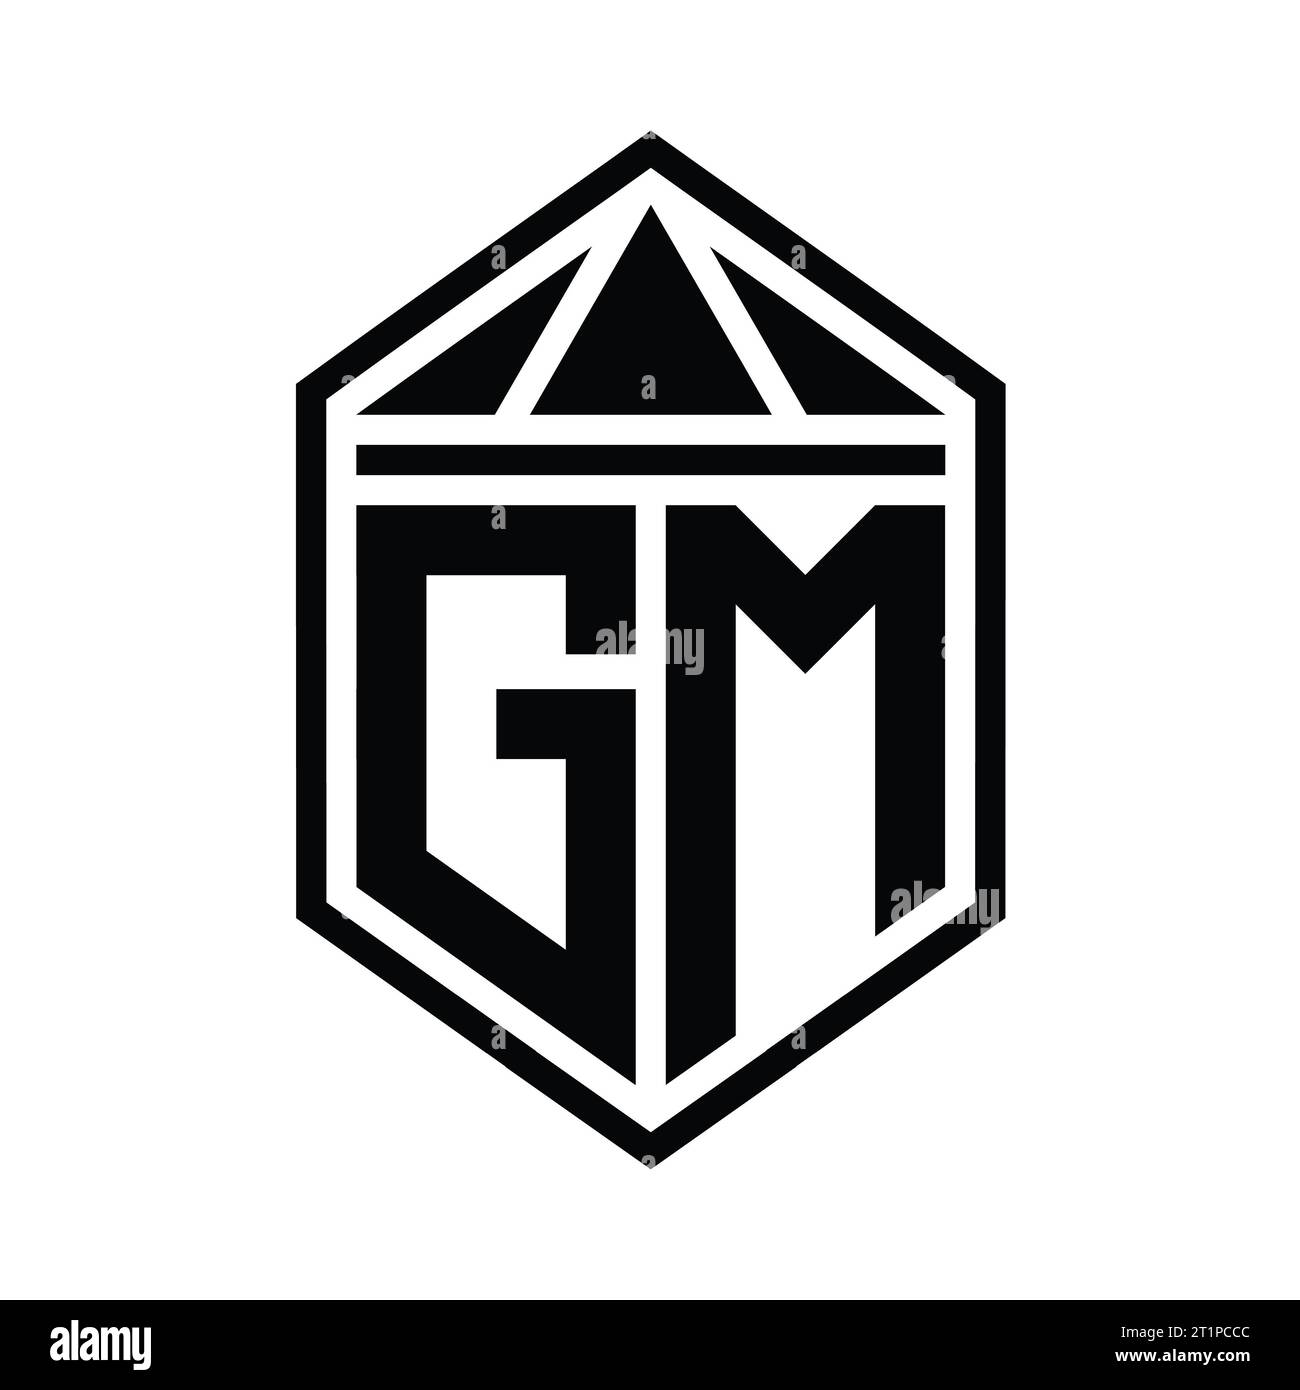 Gm monogram logo with crown shape luxury style Vector Image